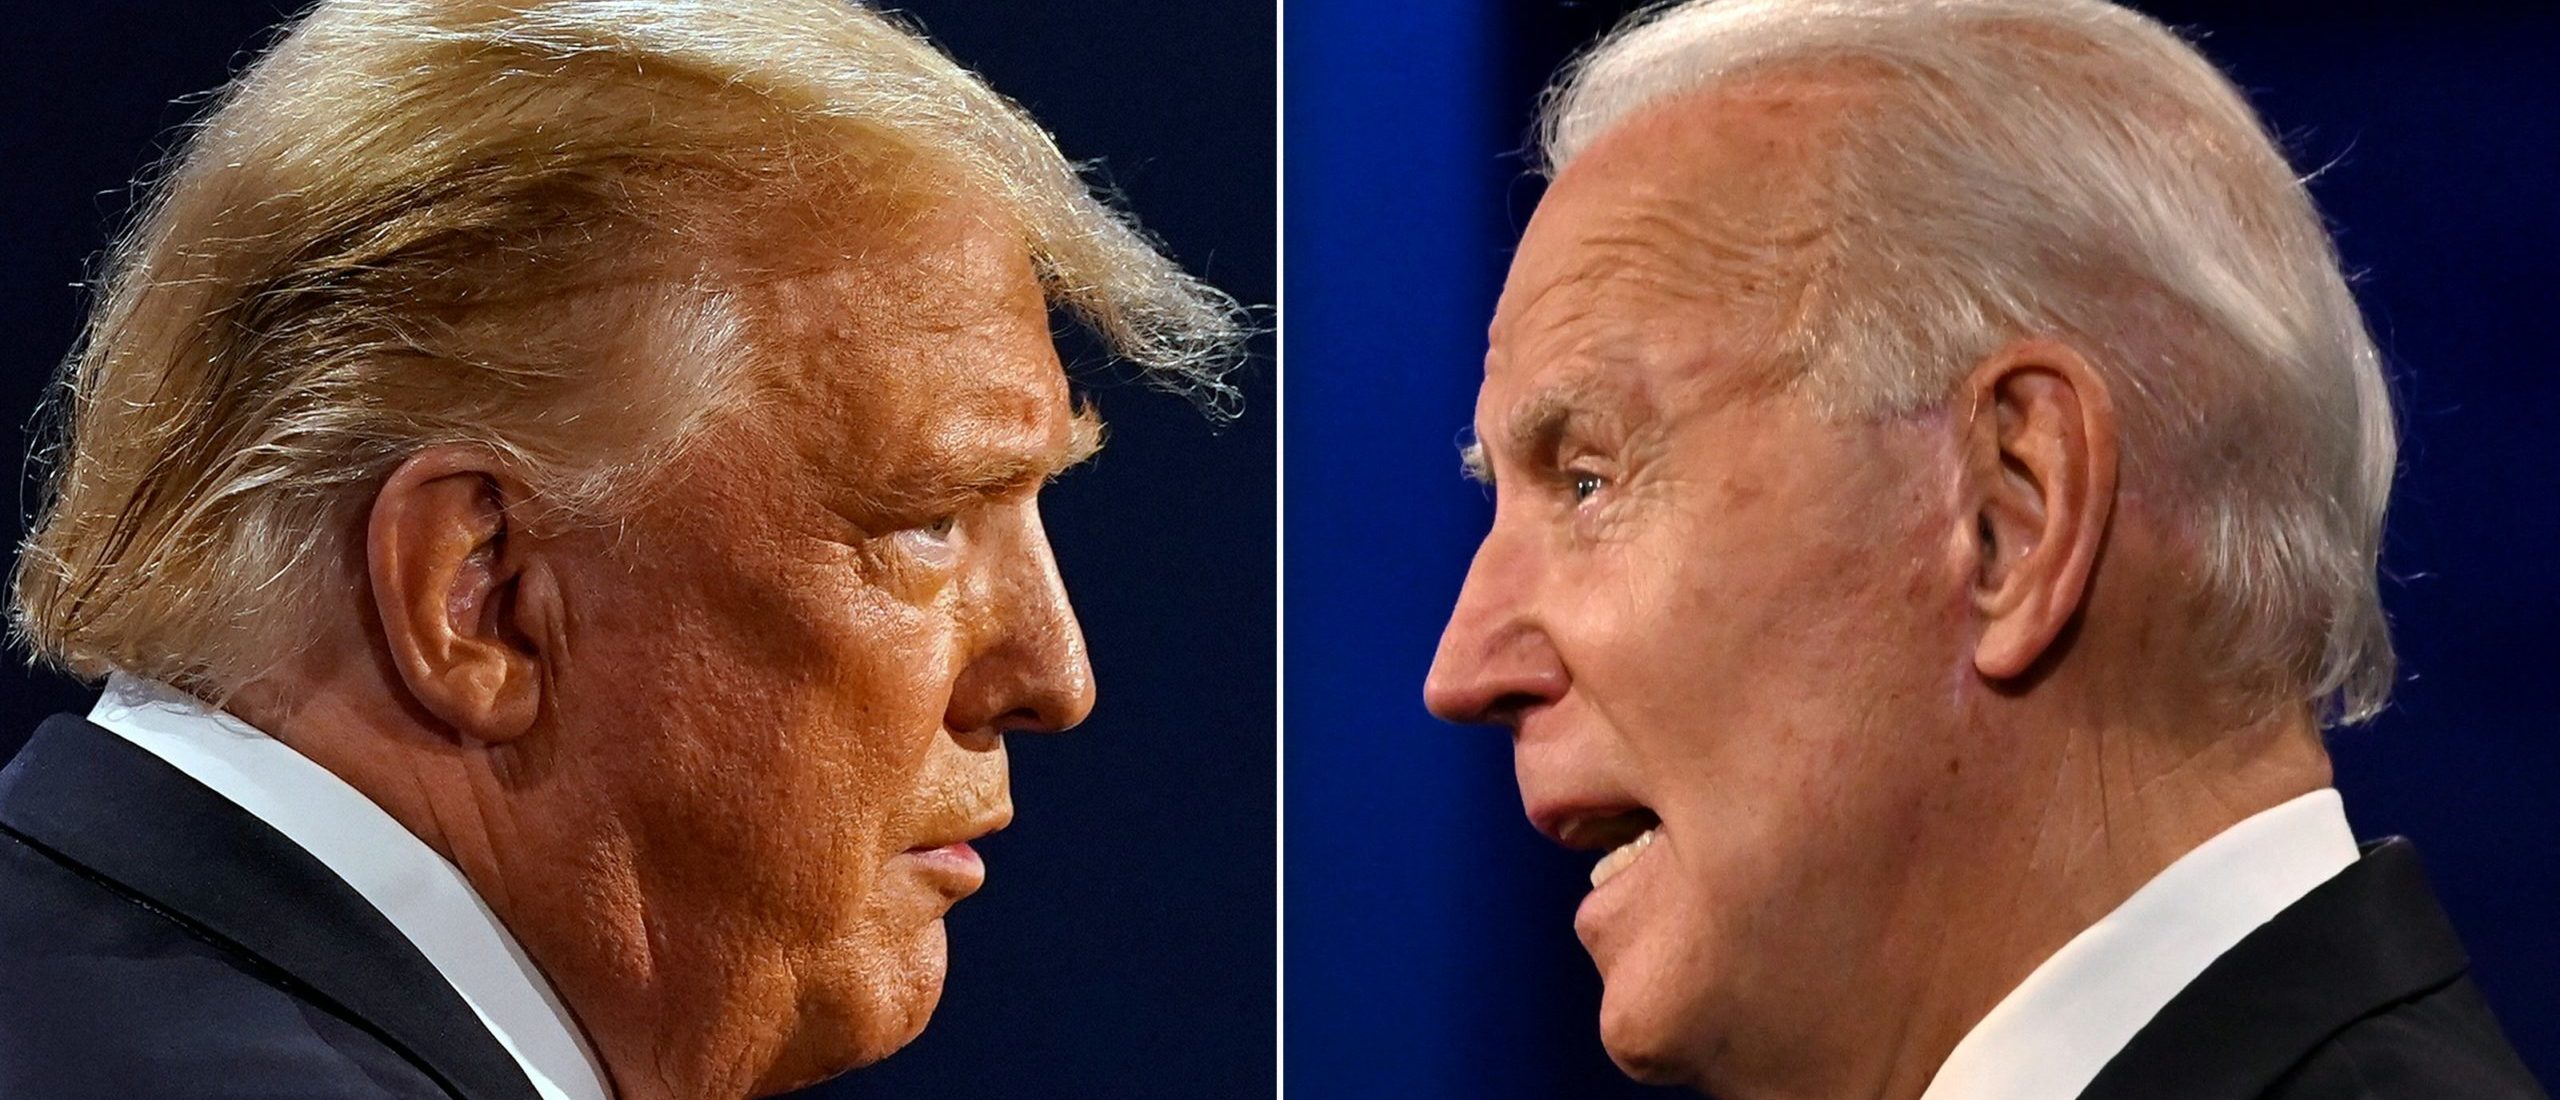 This combination of pictures created on October 22, 2020 shows US President Donald Trump (L) and Democratic Presidential candidate and former US Vice President Joe Biden during the final presidential debate at Belmont University in Nashville, Tennessee, on October 22, 2020. (Photo by MORRY GASH,JIM WATSON/AFP via Getty Images)